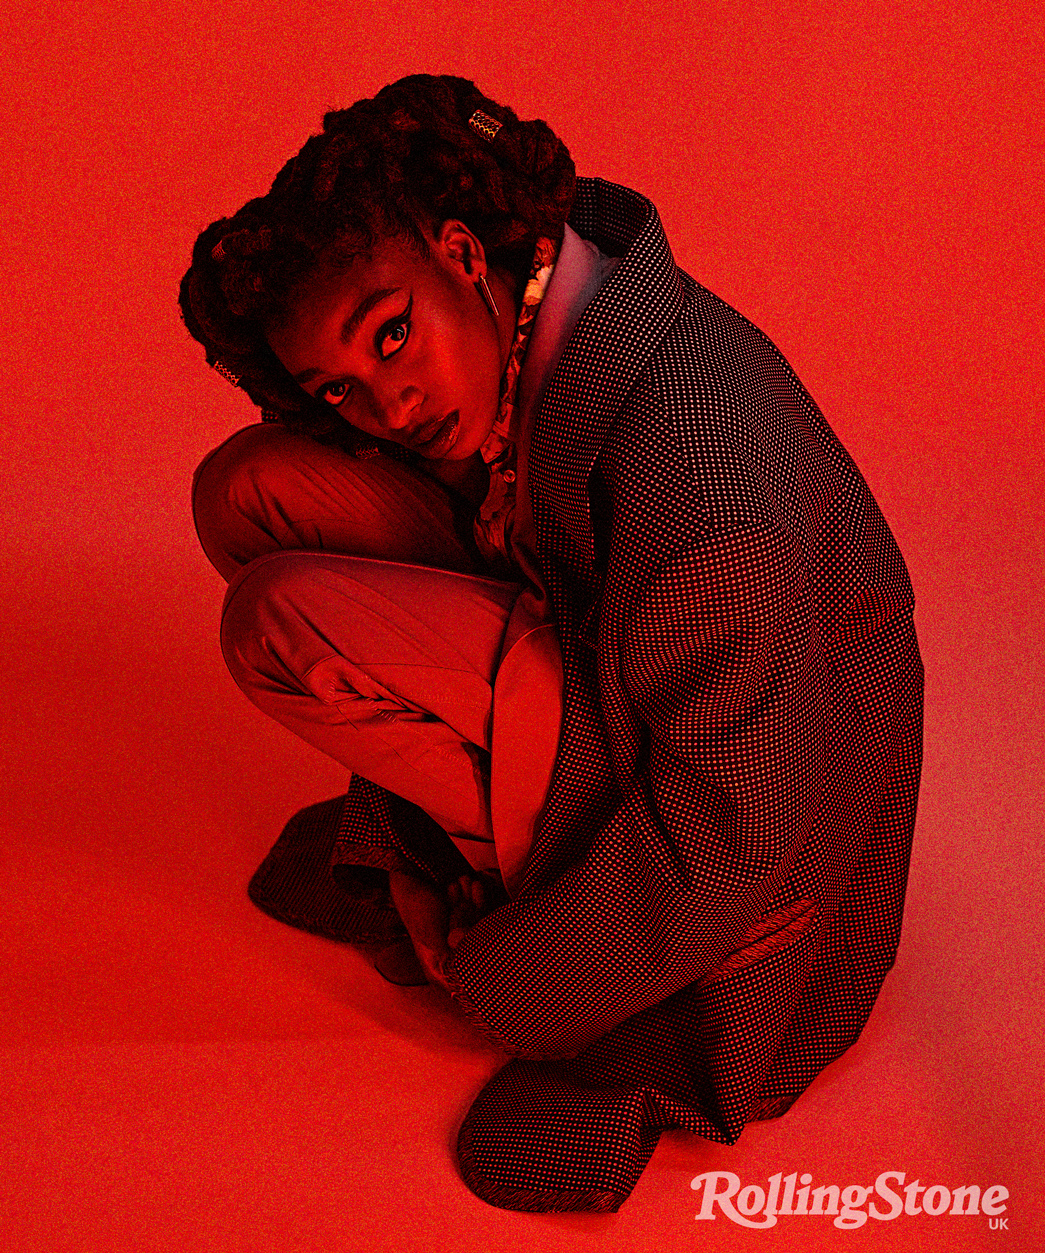 Little Simz photographed for Rolling Stone UK